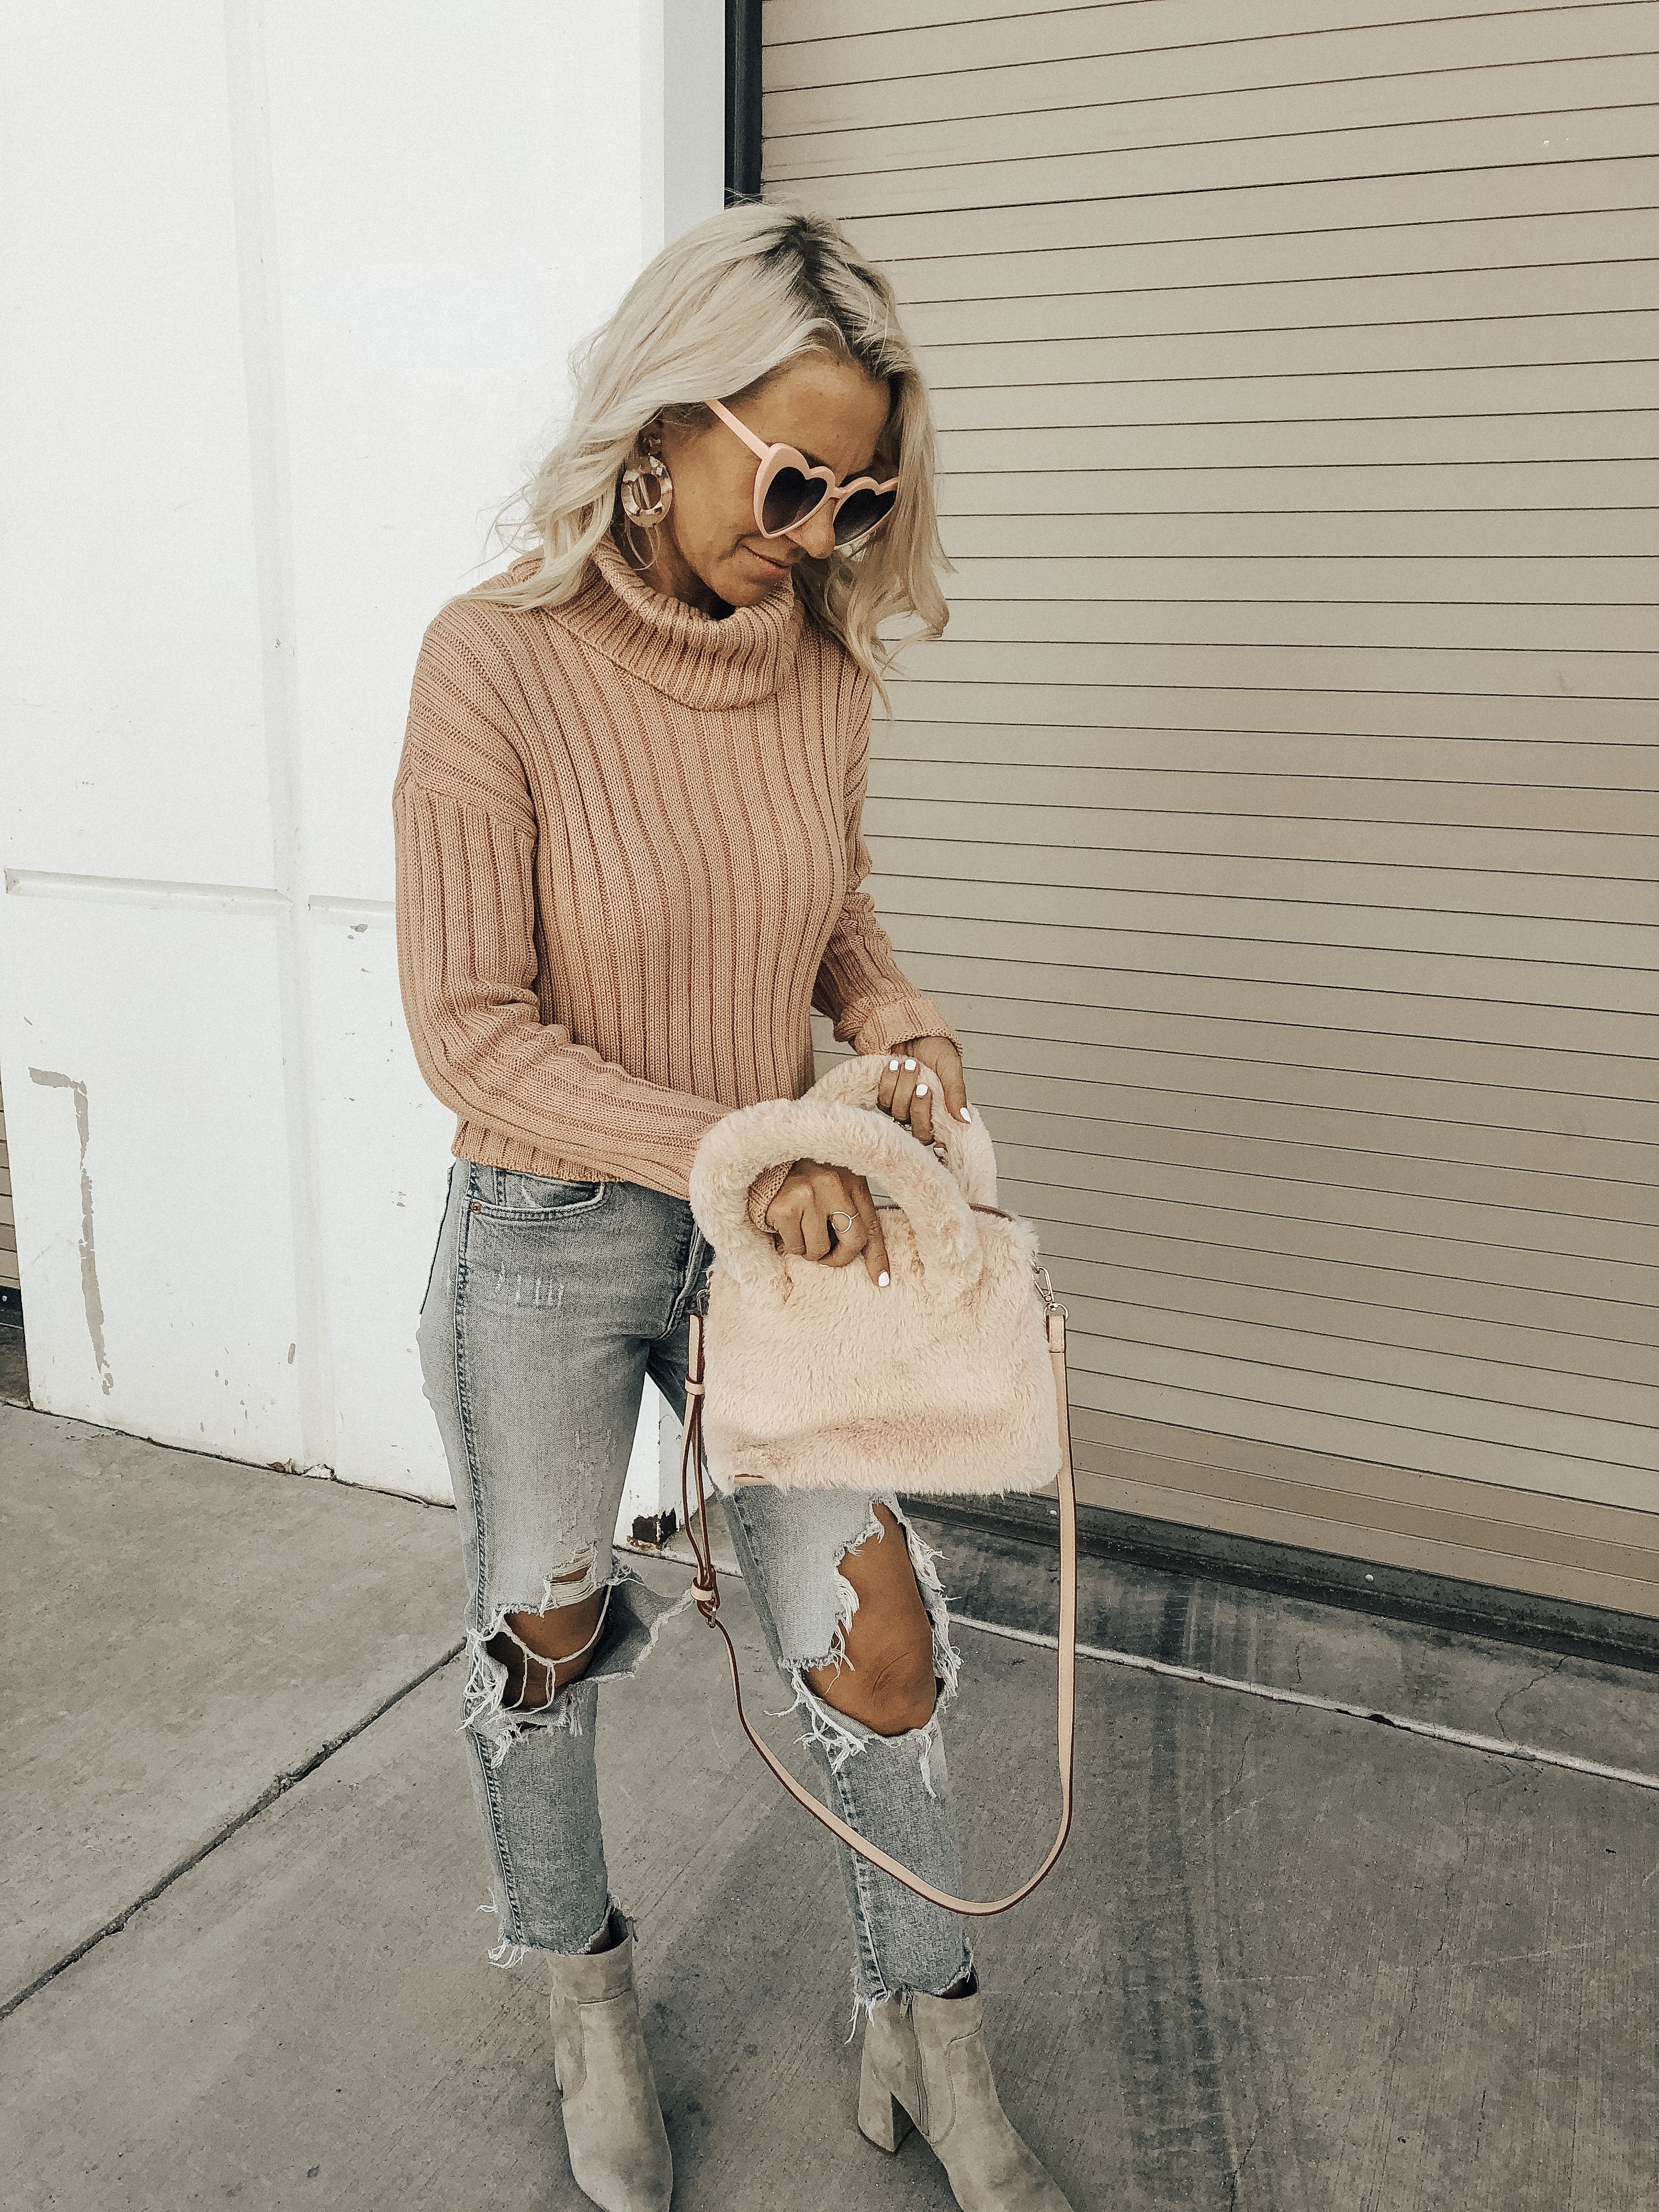 THINK PINK- Jaclyn De Leon Style + pink for October + cozy tutleneck sweater + teddy coat + distressed denim + pink faux fur handbag + heart sunglasses + casual style + fall fashion + street style + mom style + what to wear this season + winter outfit